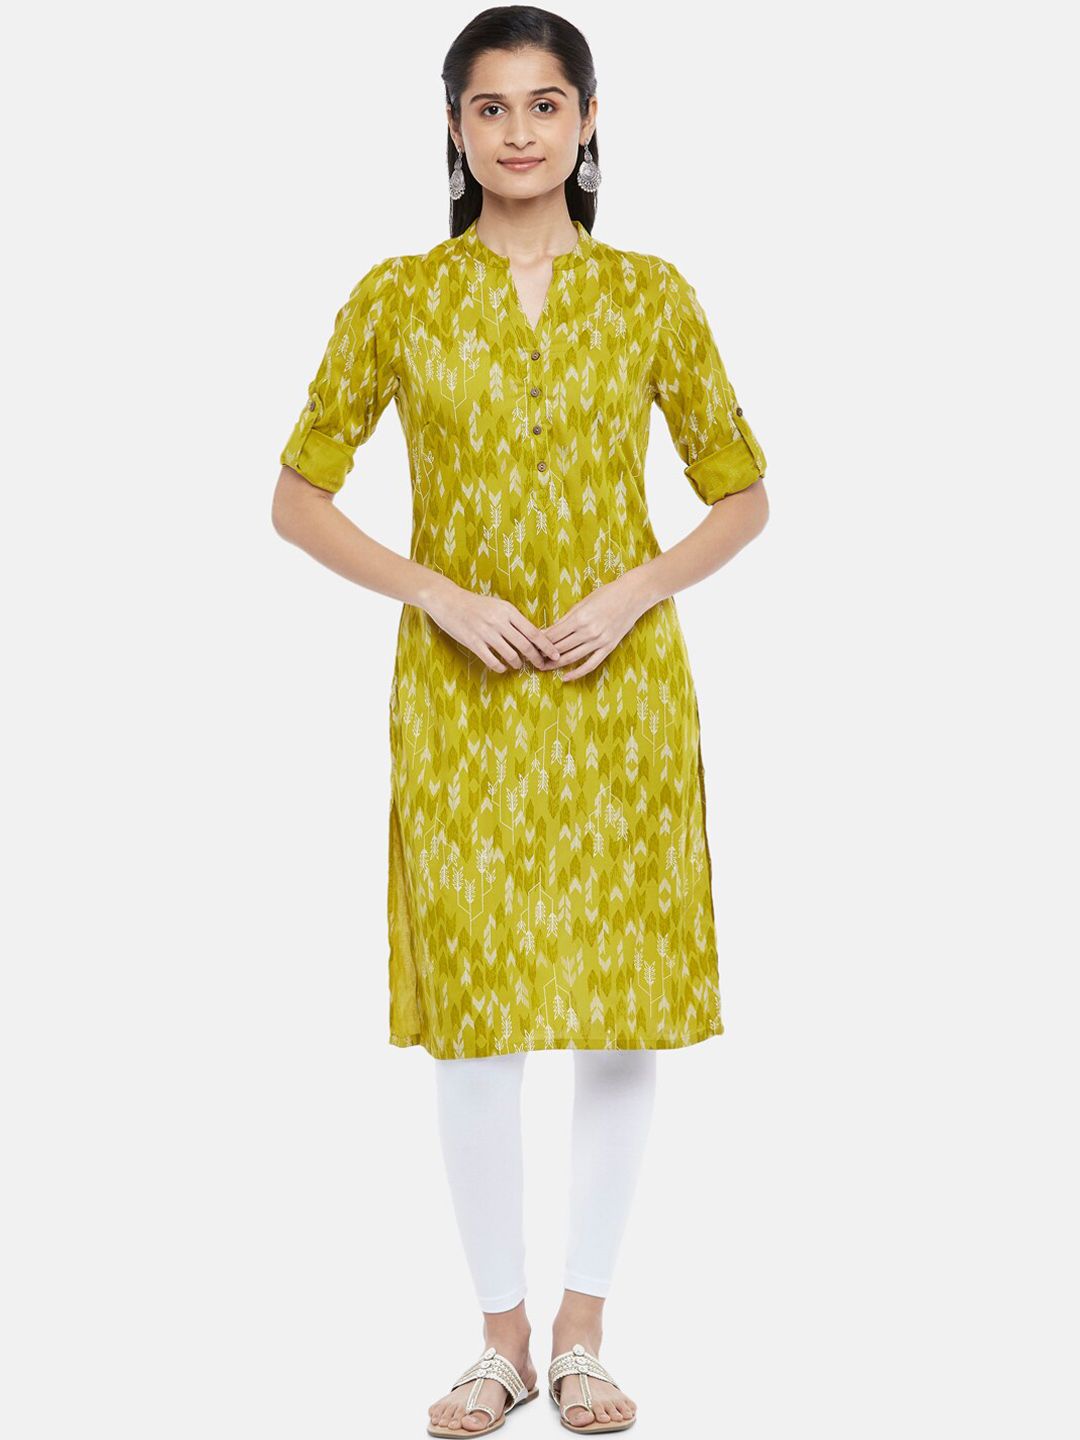 RANGMANCH BY PANTALOONS Women Black & White Printed Straight Kurta Price in  India, Full Specifications & Offers